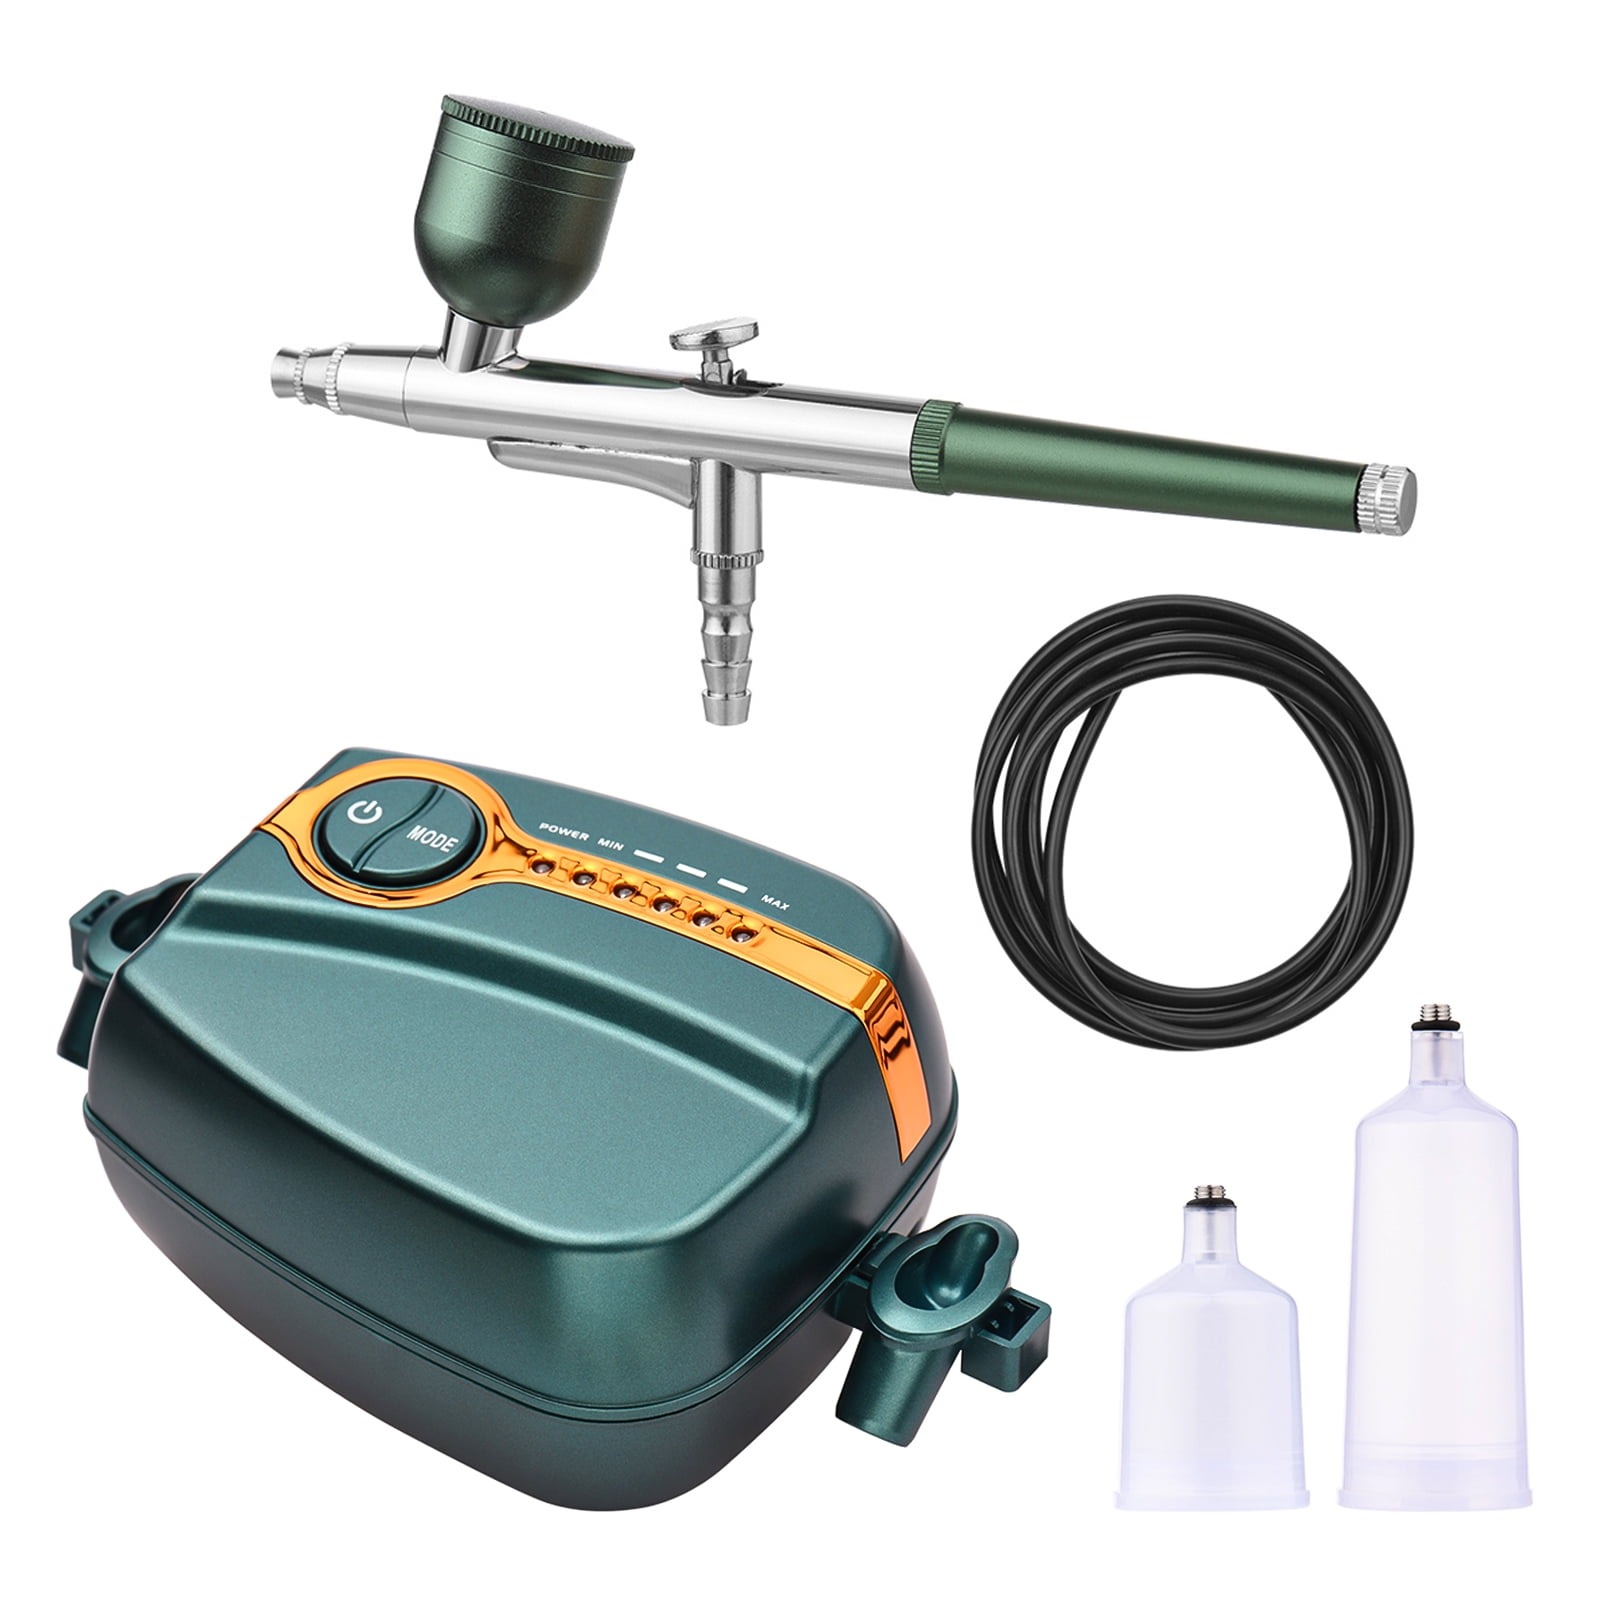 DUEBEL Airbrush Kit, Air Brush with Compressor Kit, Portable